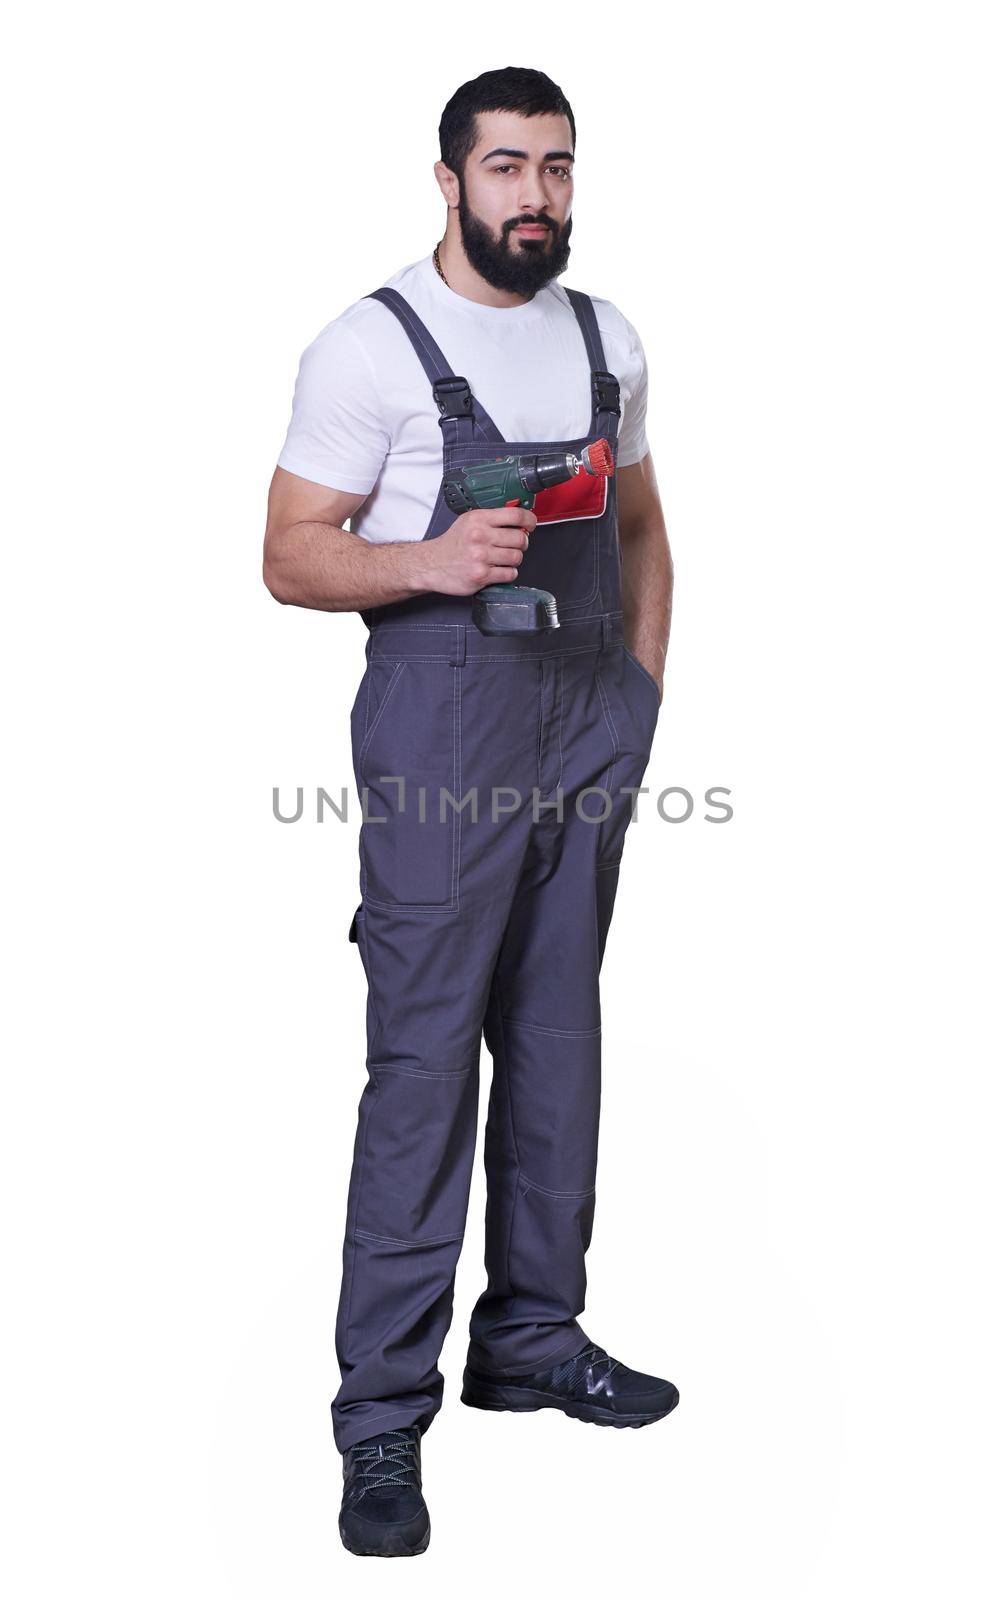 smiling worker with red drill on white background